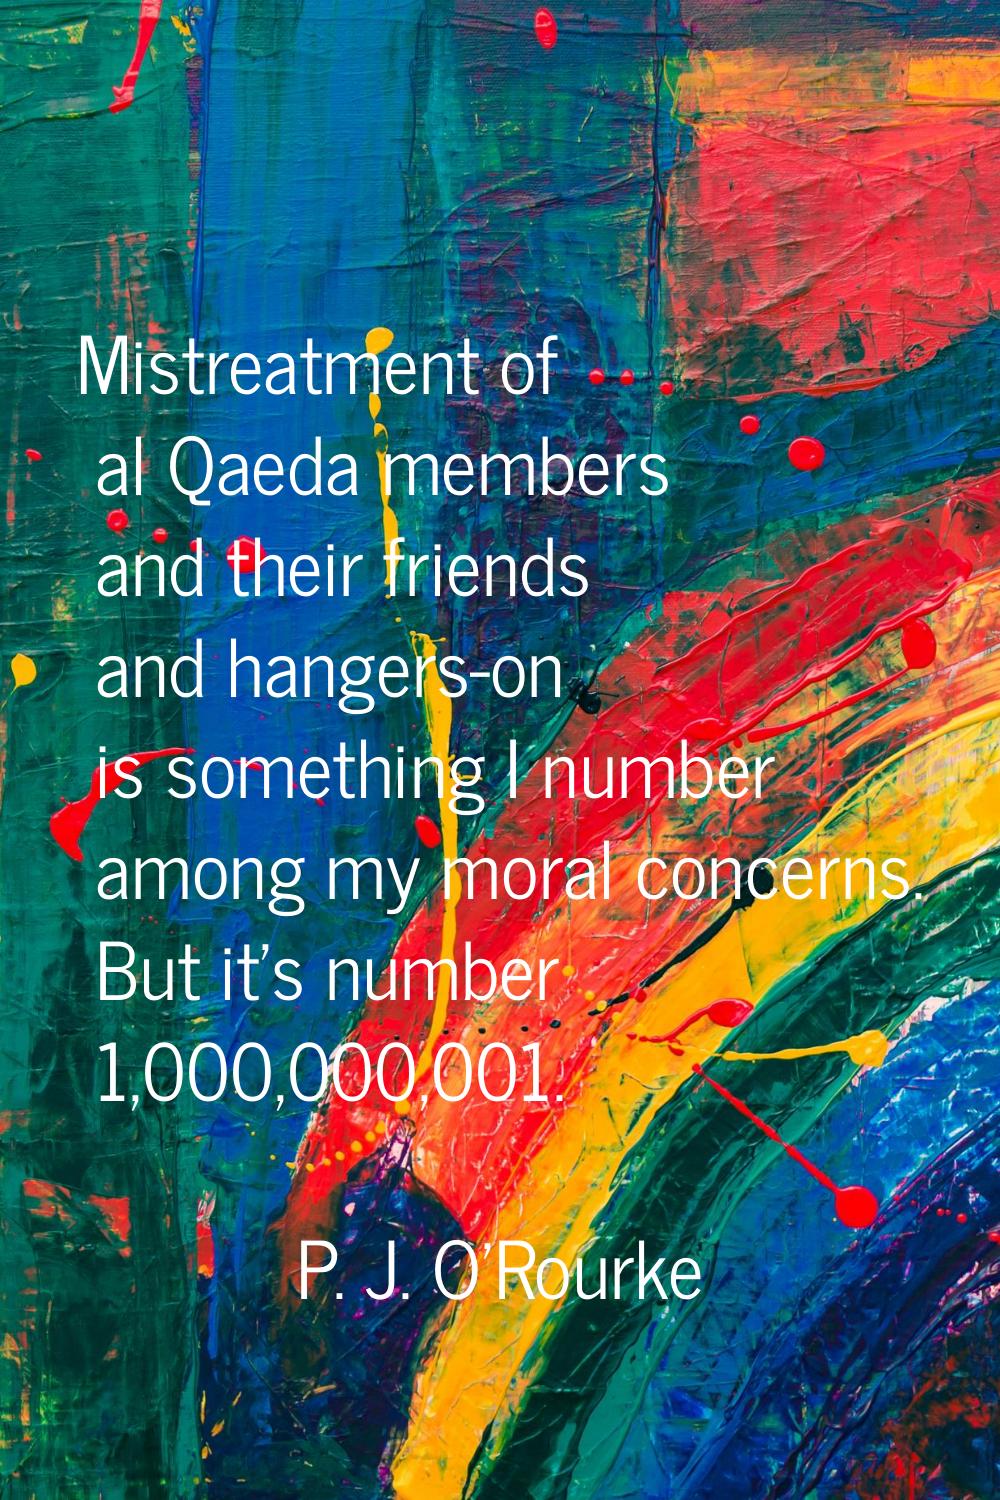 Mistreatment of al Qaeda members and their friends and hangers-on is something I number among my mo